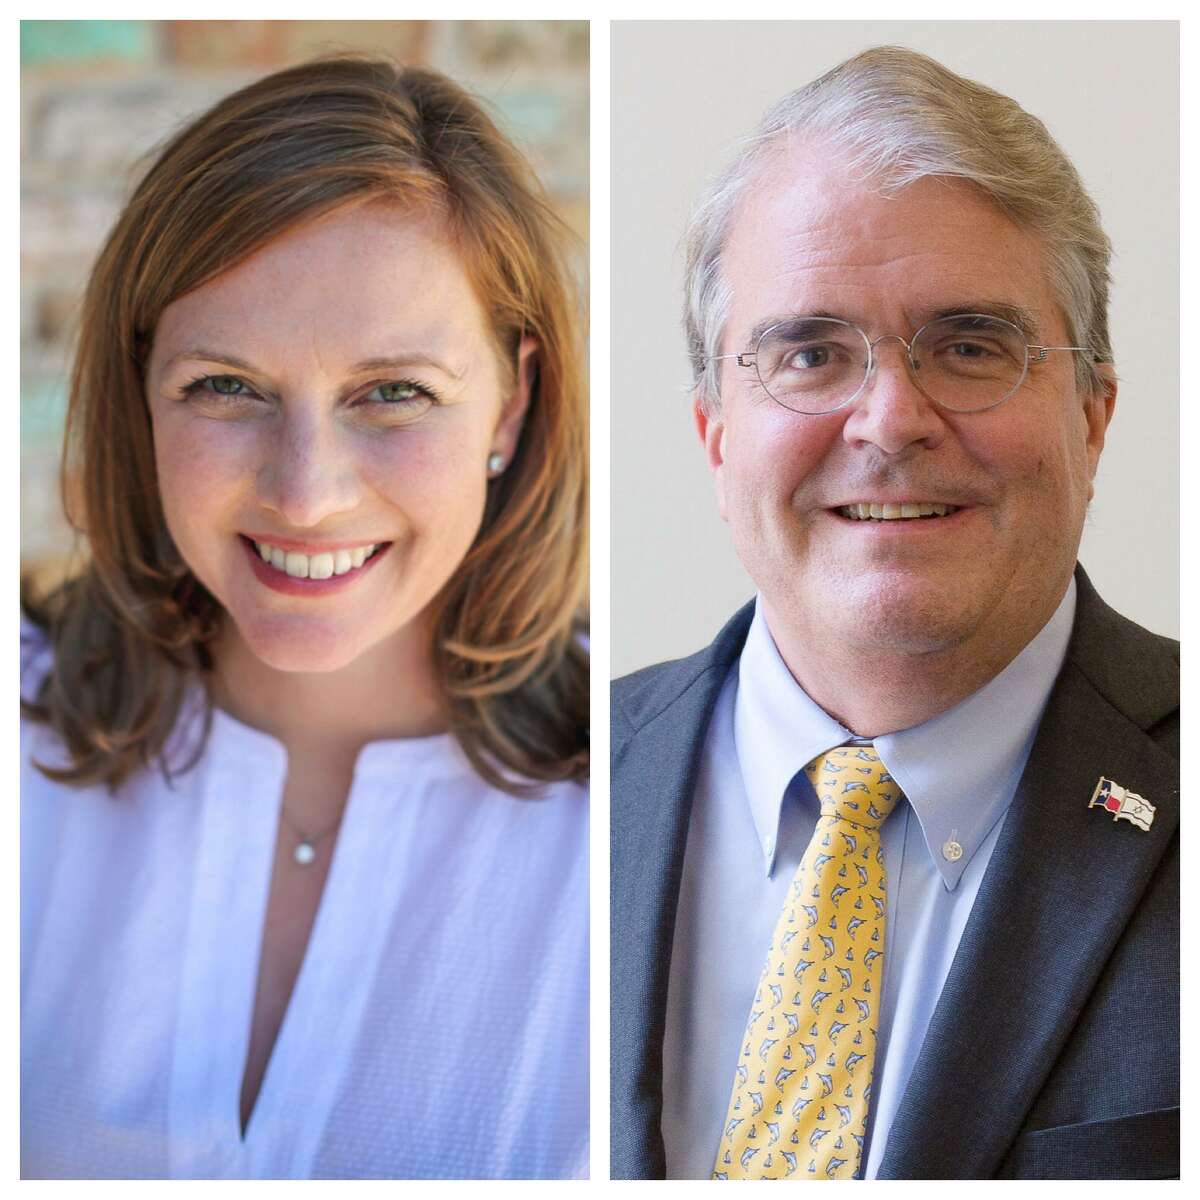 Democrat Lizzie Pannill Fletcher and Republican John Culberson are running for U.S. Congress in Houston’s Congressional District 7.